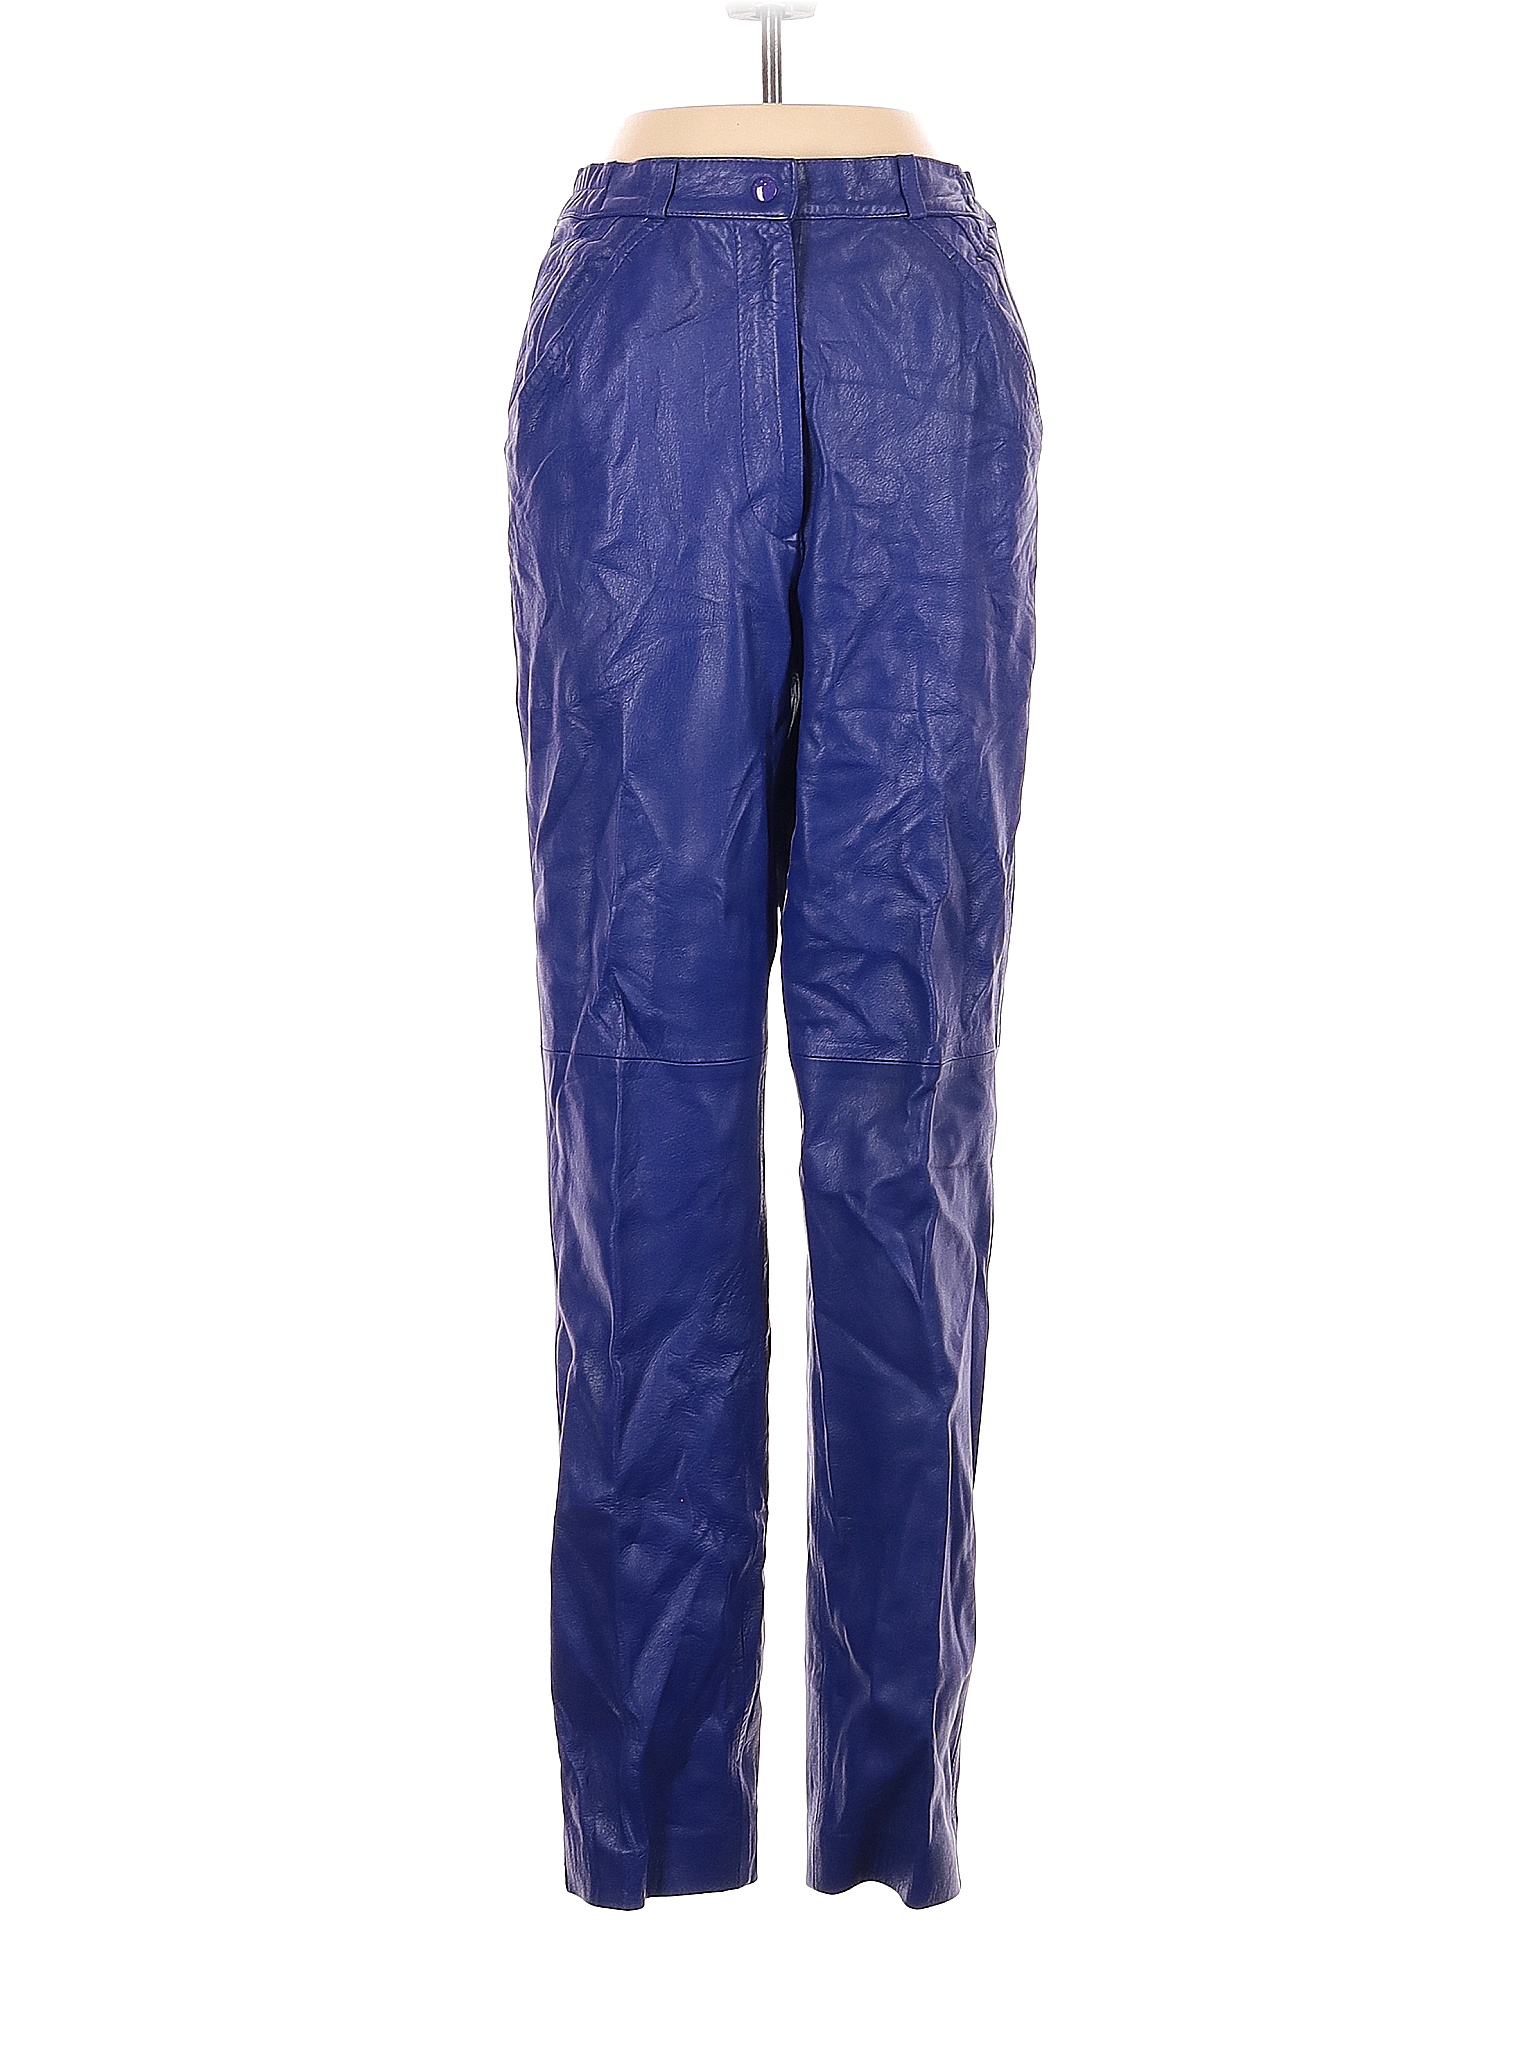 Suzelle 100% Leather Blue Leather Pants Size 4 - 77% off | thredUP